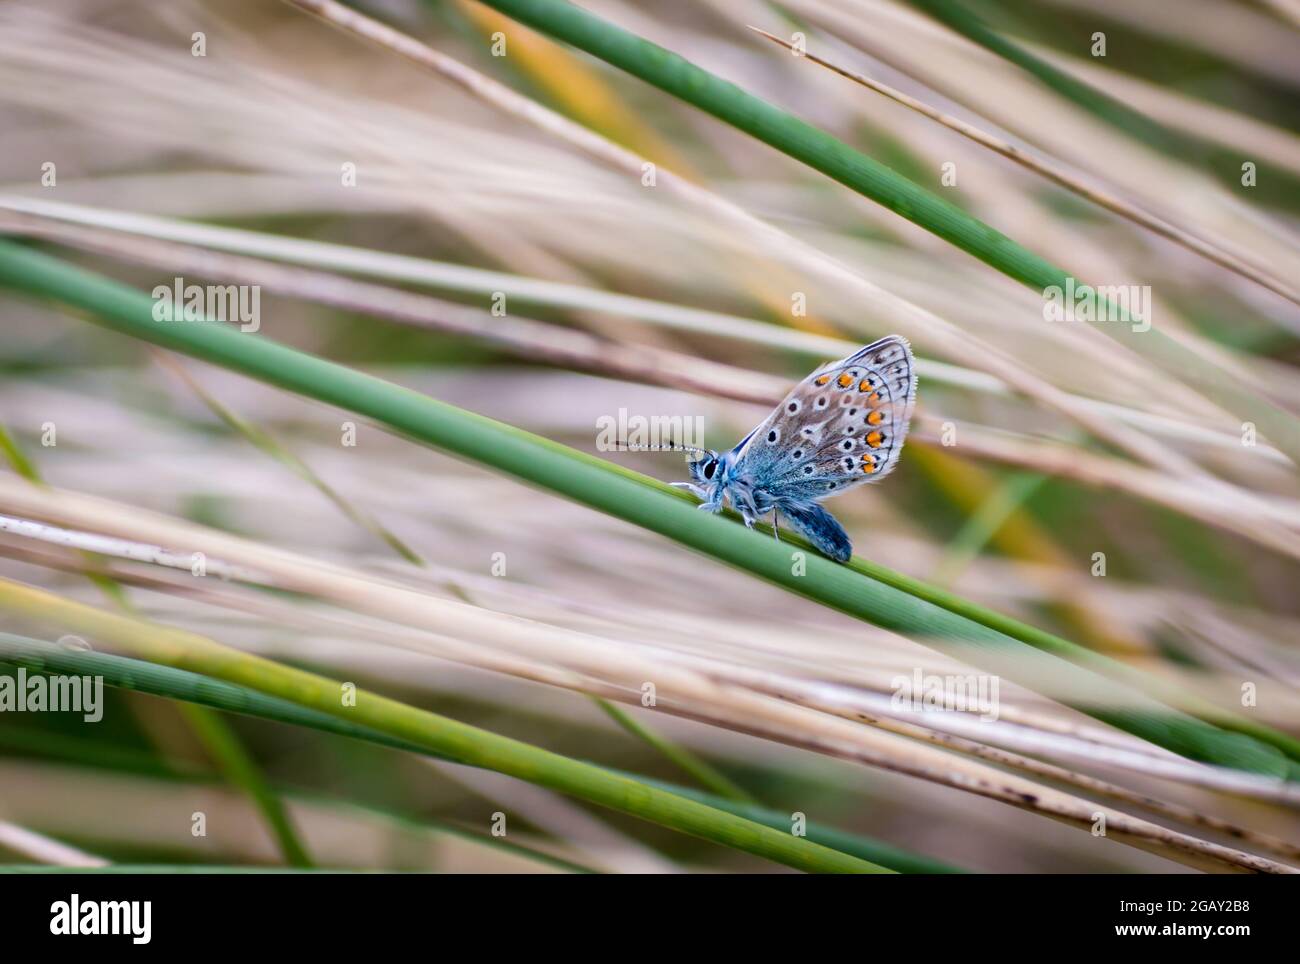 Ventral view of a common blue butterfly in grass with closed wings Stock Photo